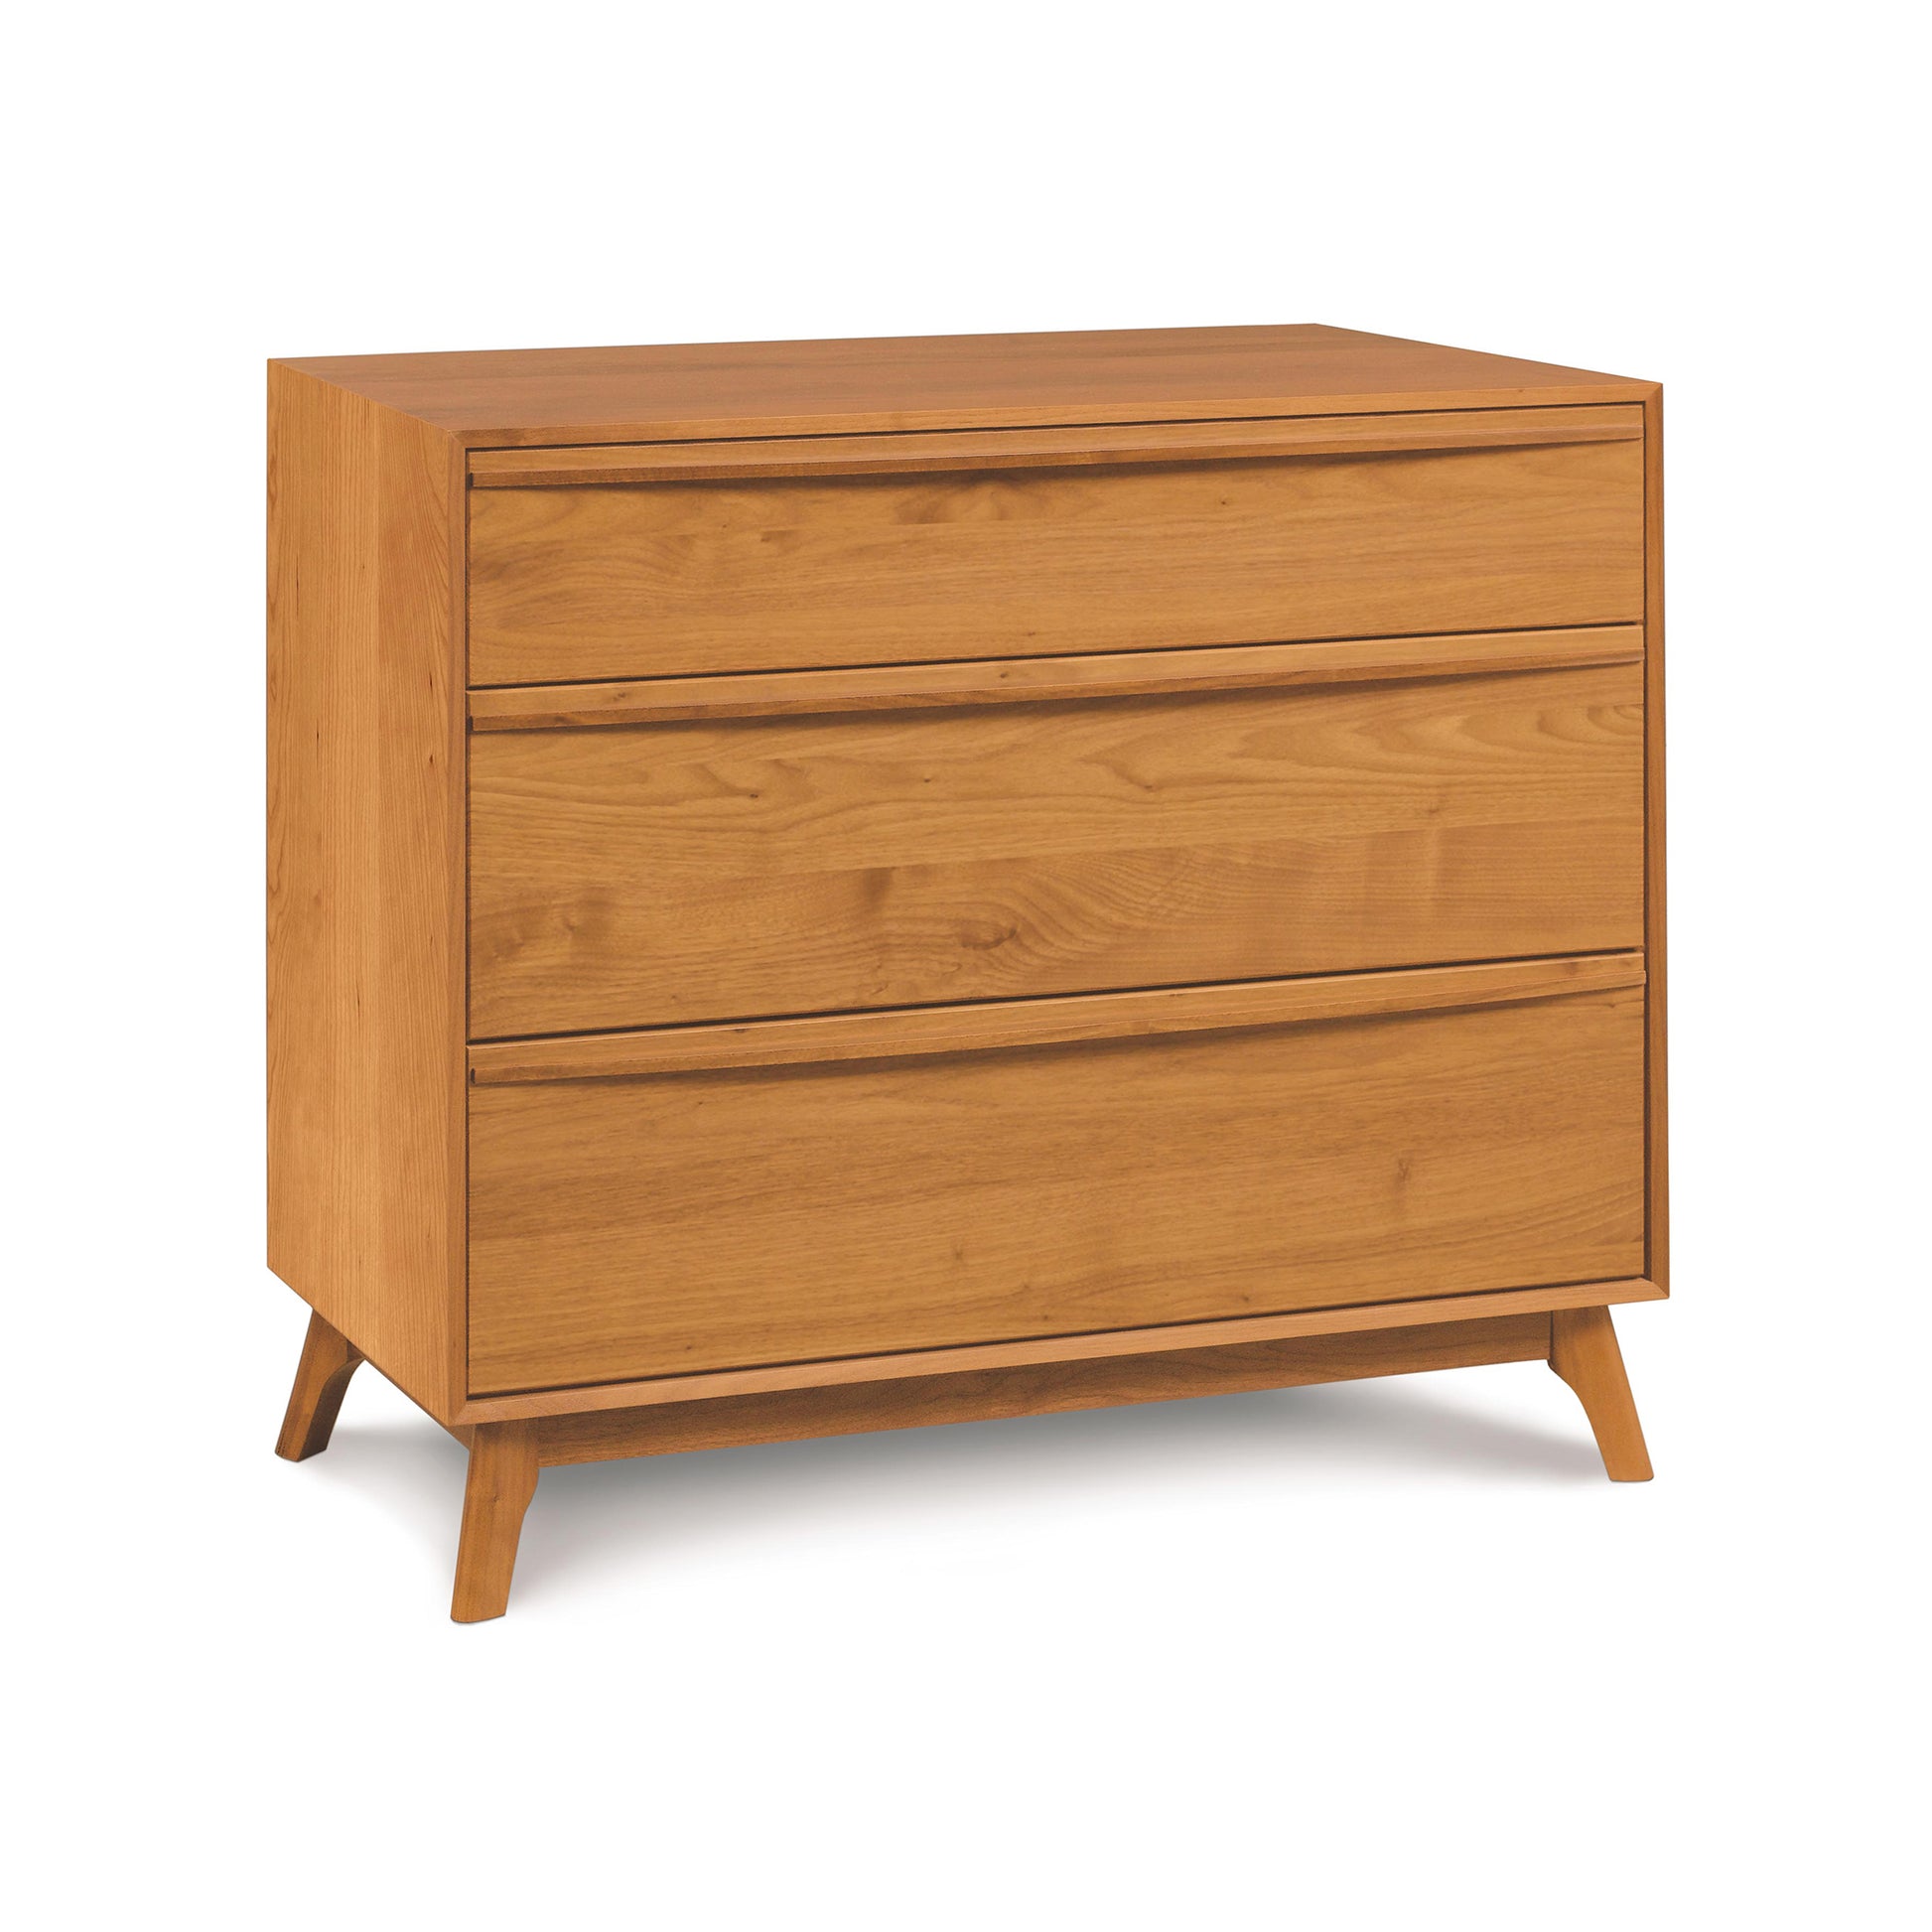 A modern bedroom wooden chest of drawers, the Catalina 3-Drawer Chest by Copeland Furniture, on a white background.